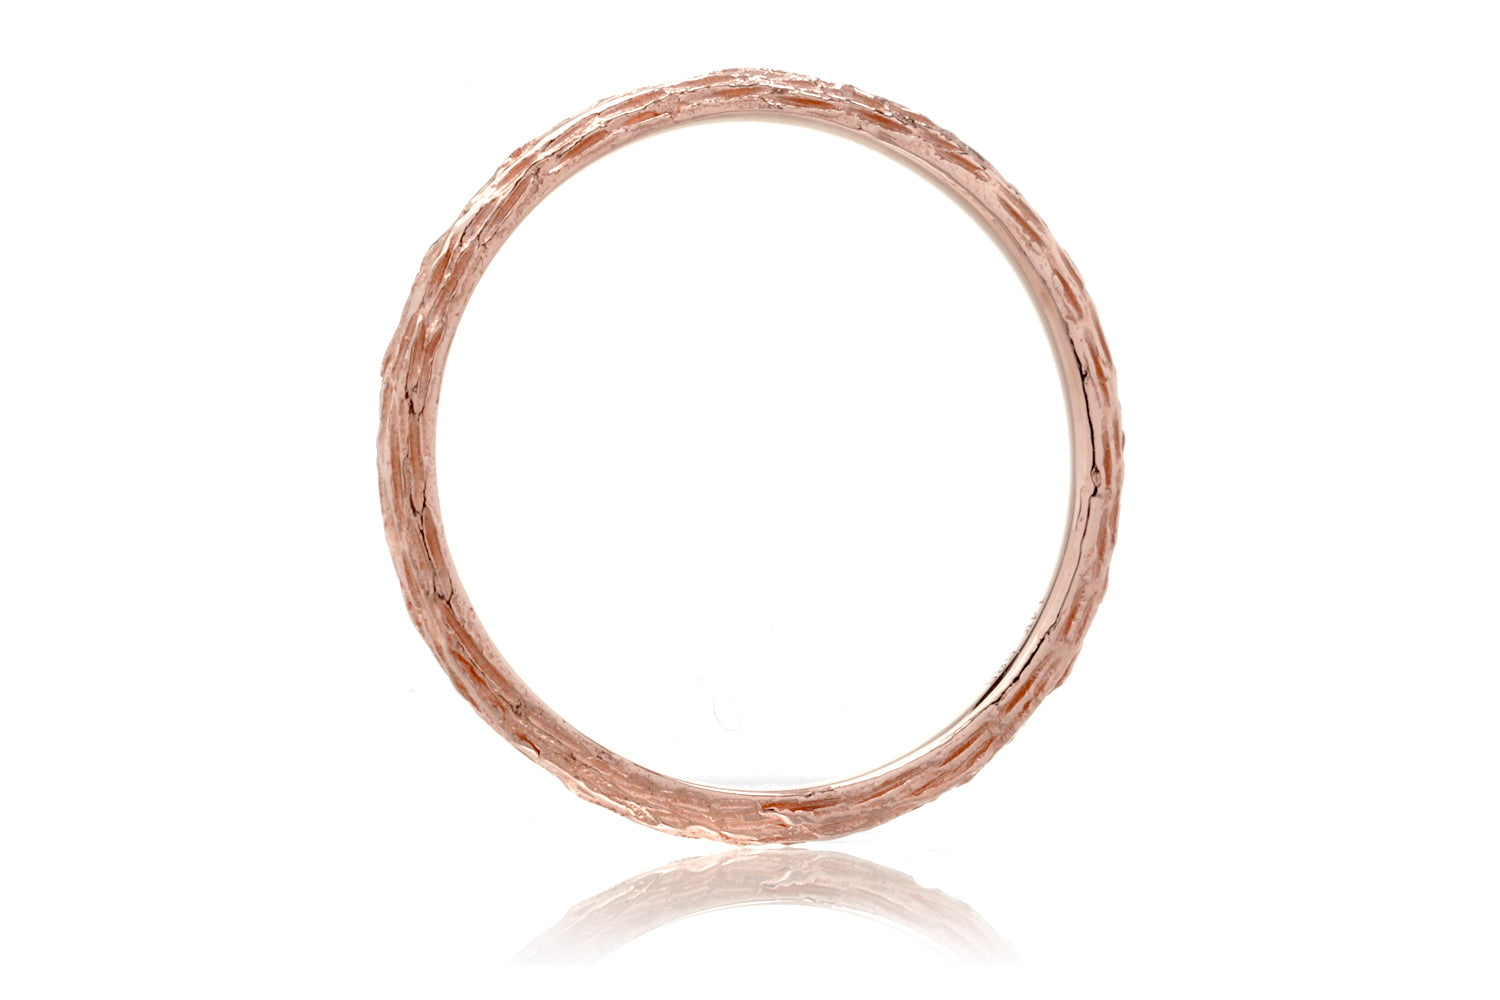 The Twig Band (1.7mm)